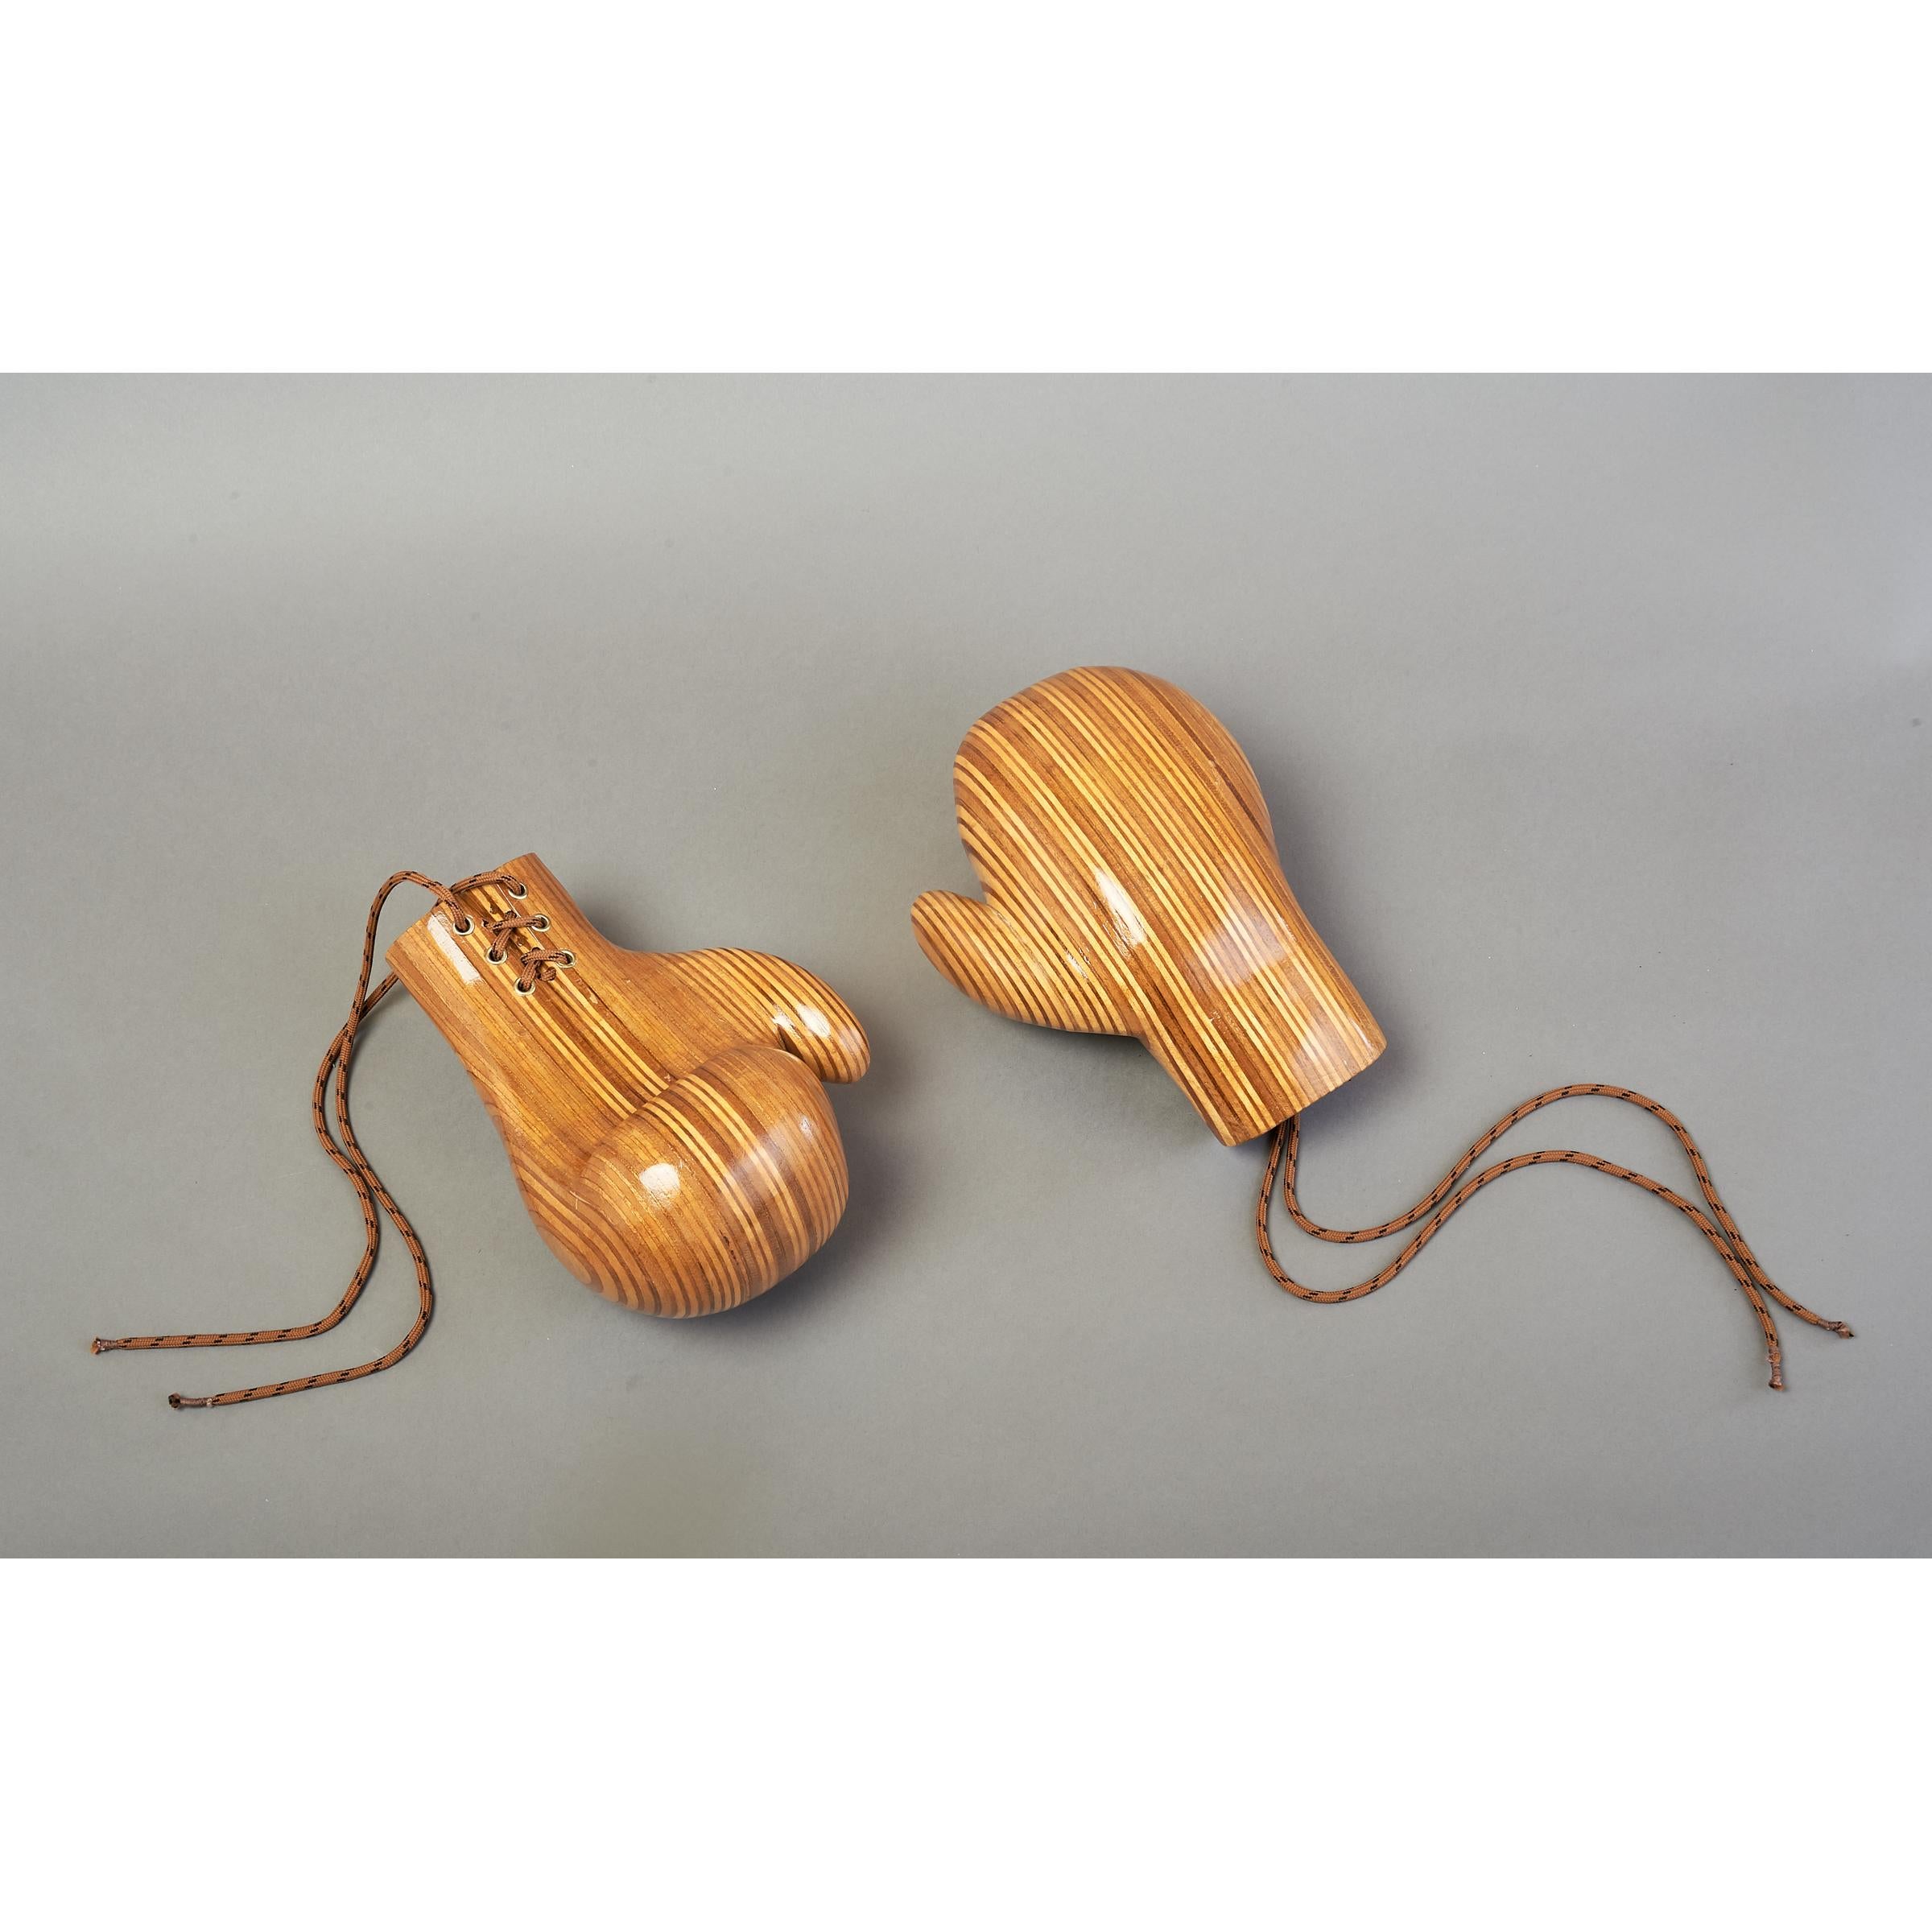 Pair of boxing gloves in a beautifully sculpted polished laminated wood.
Each glove: 10 W x 6 D x 6 H.
France, late 20th century.